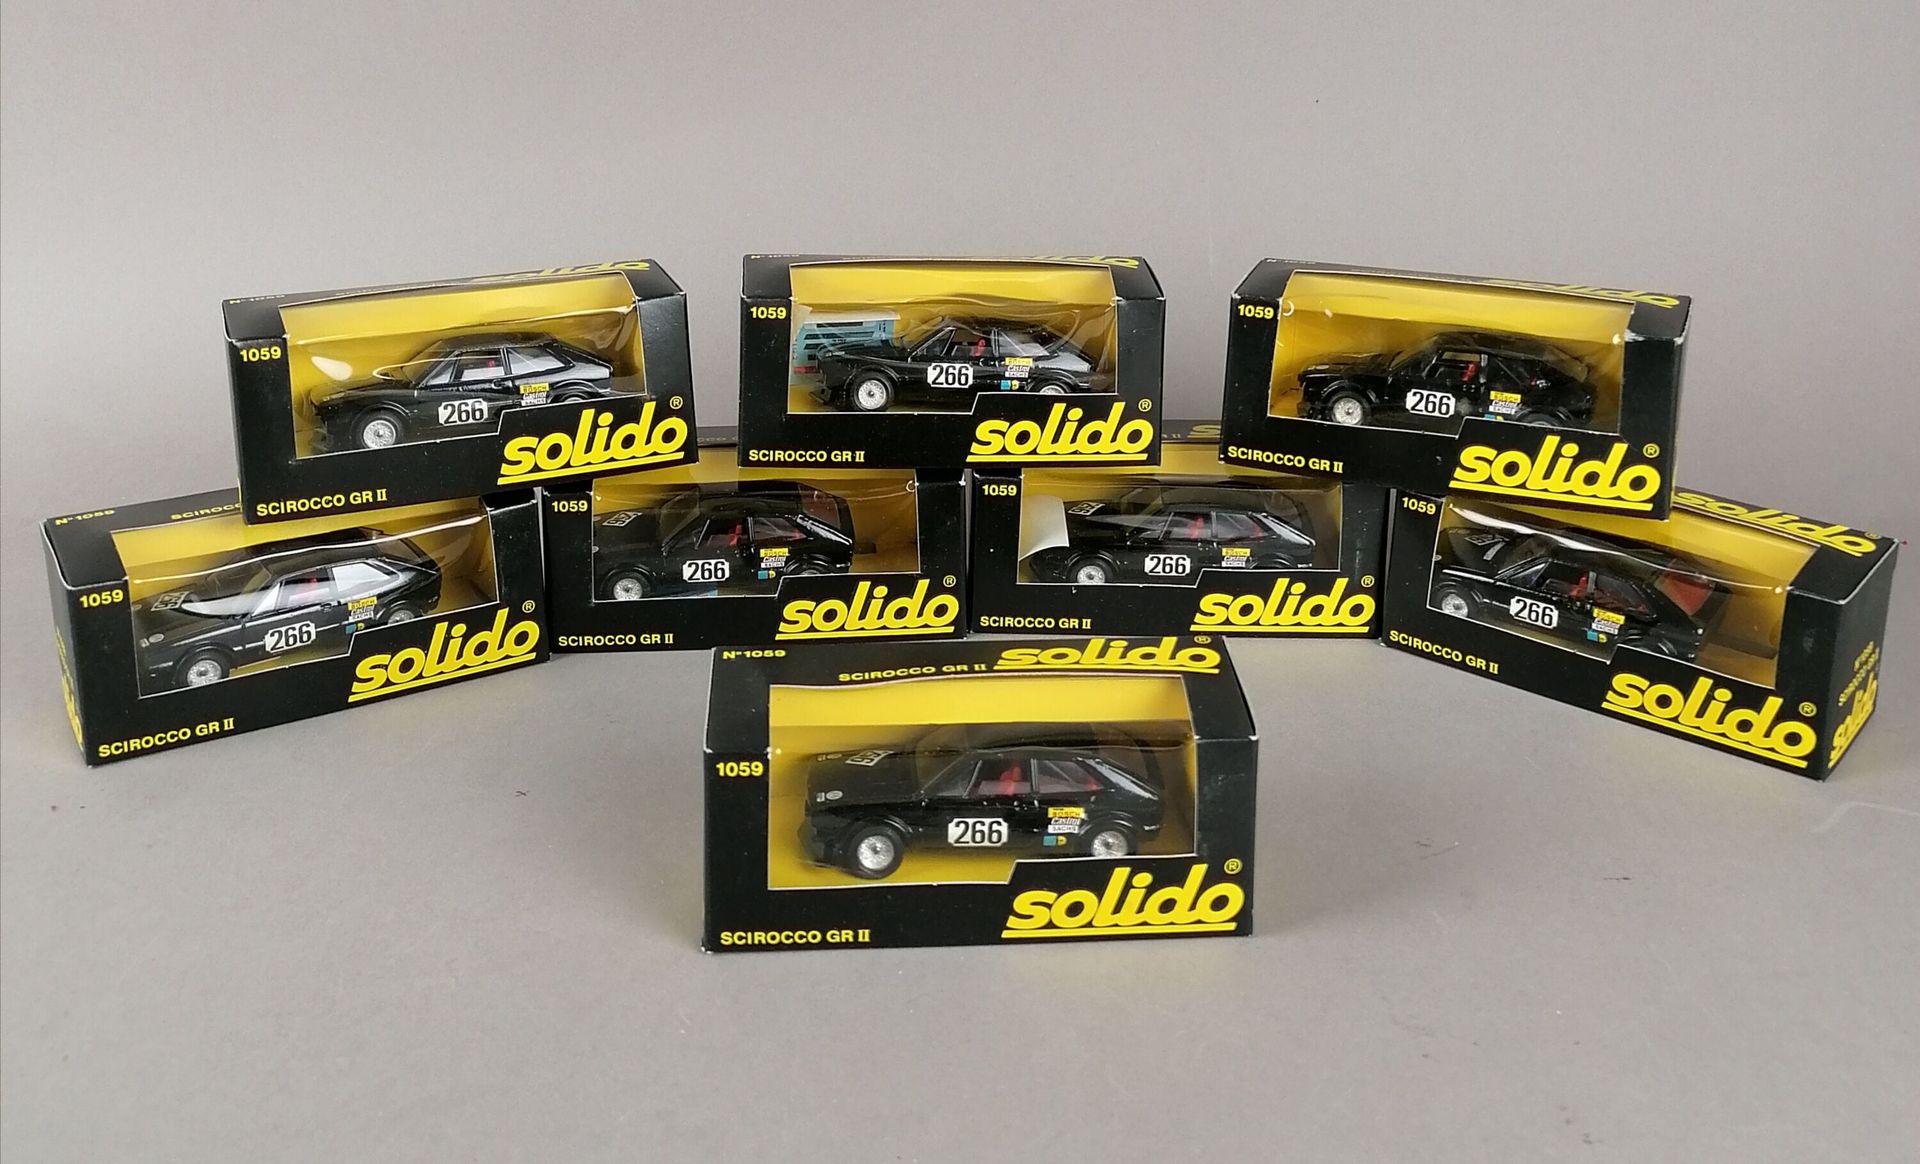 Null SOLIDO - 17 Scirocco GR II n°1059, scale 1/43 in their original boxes